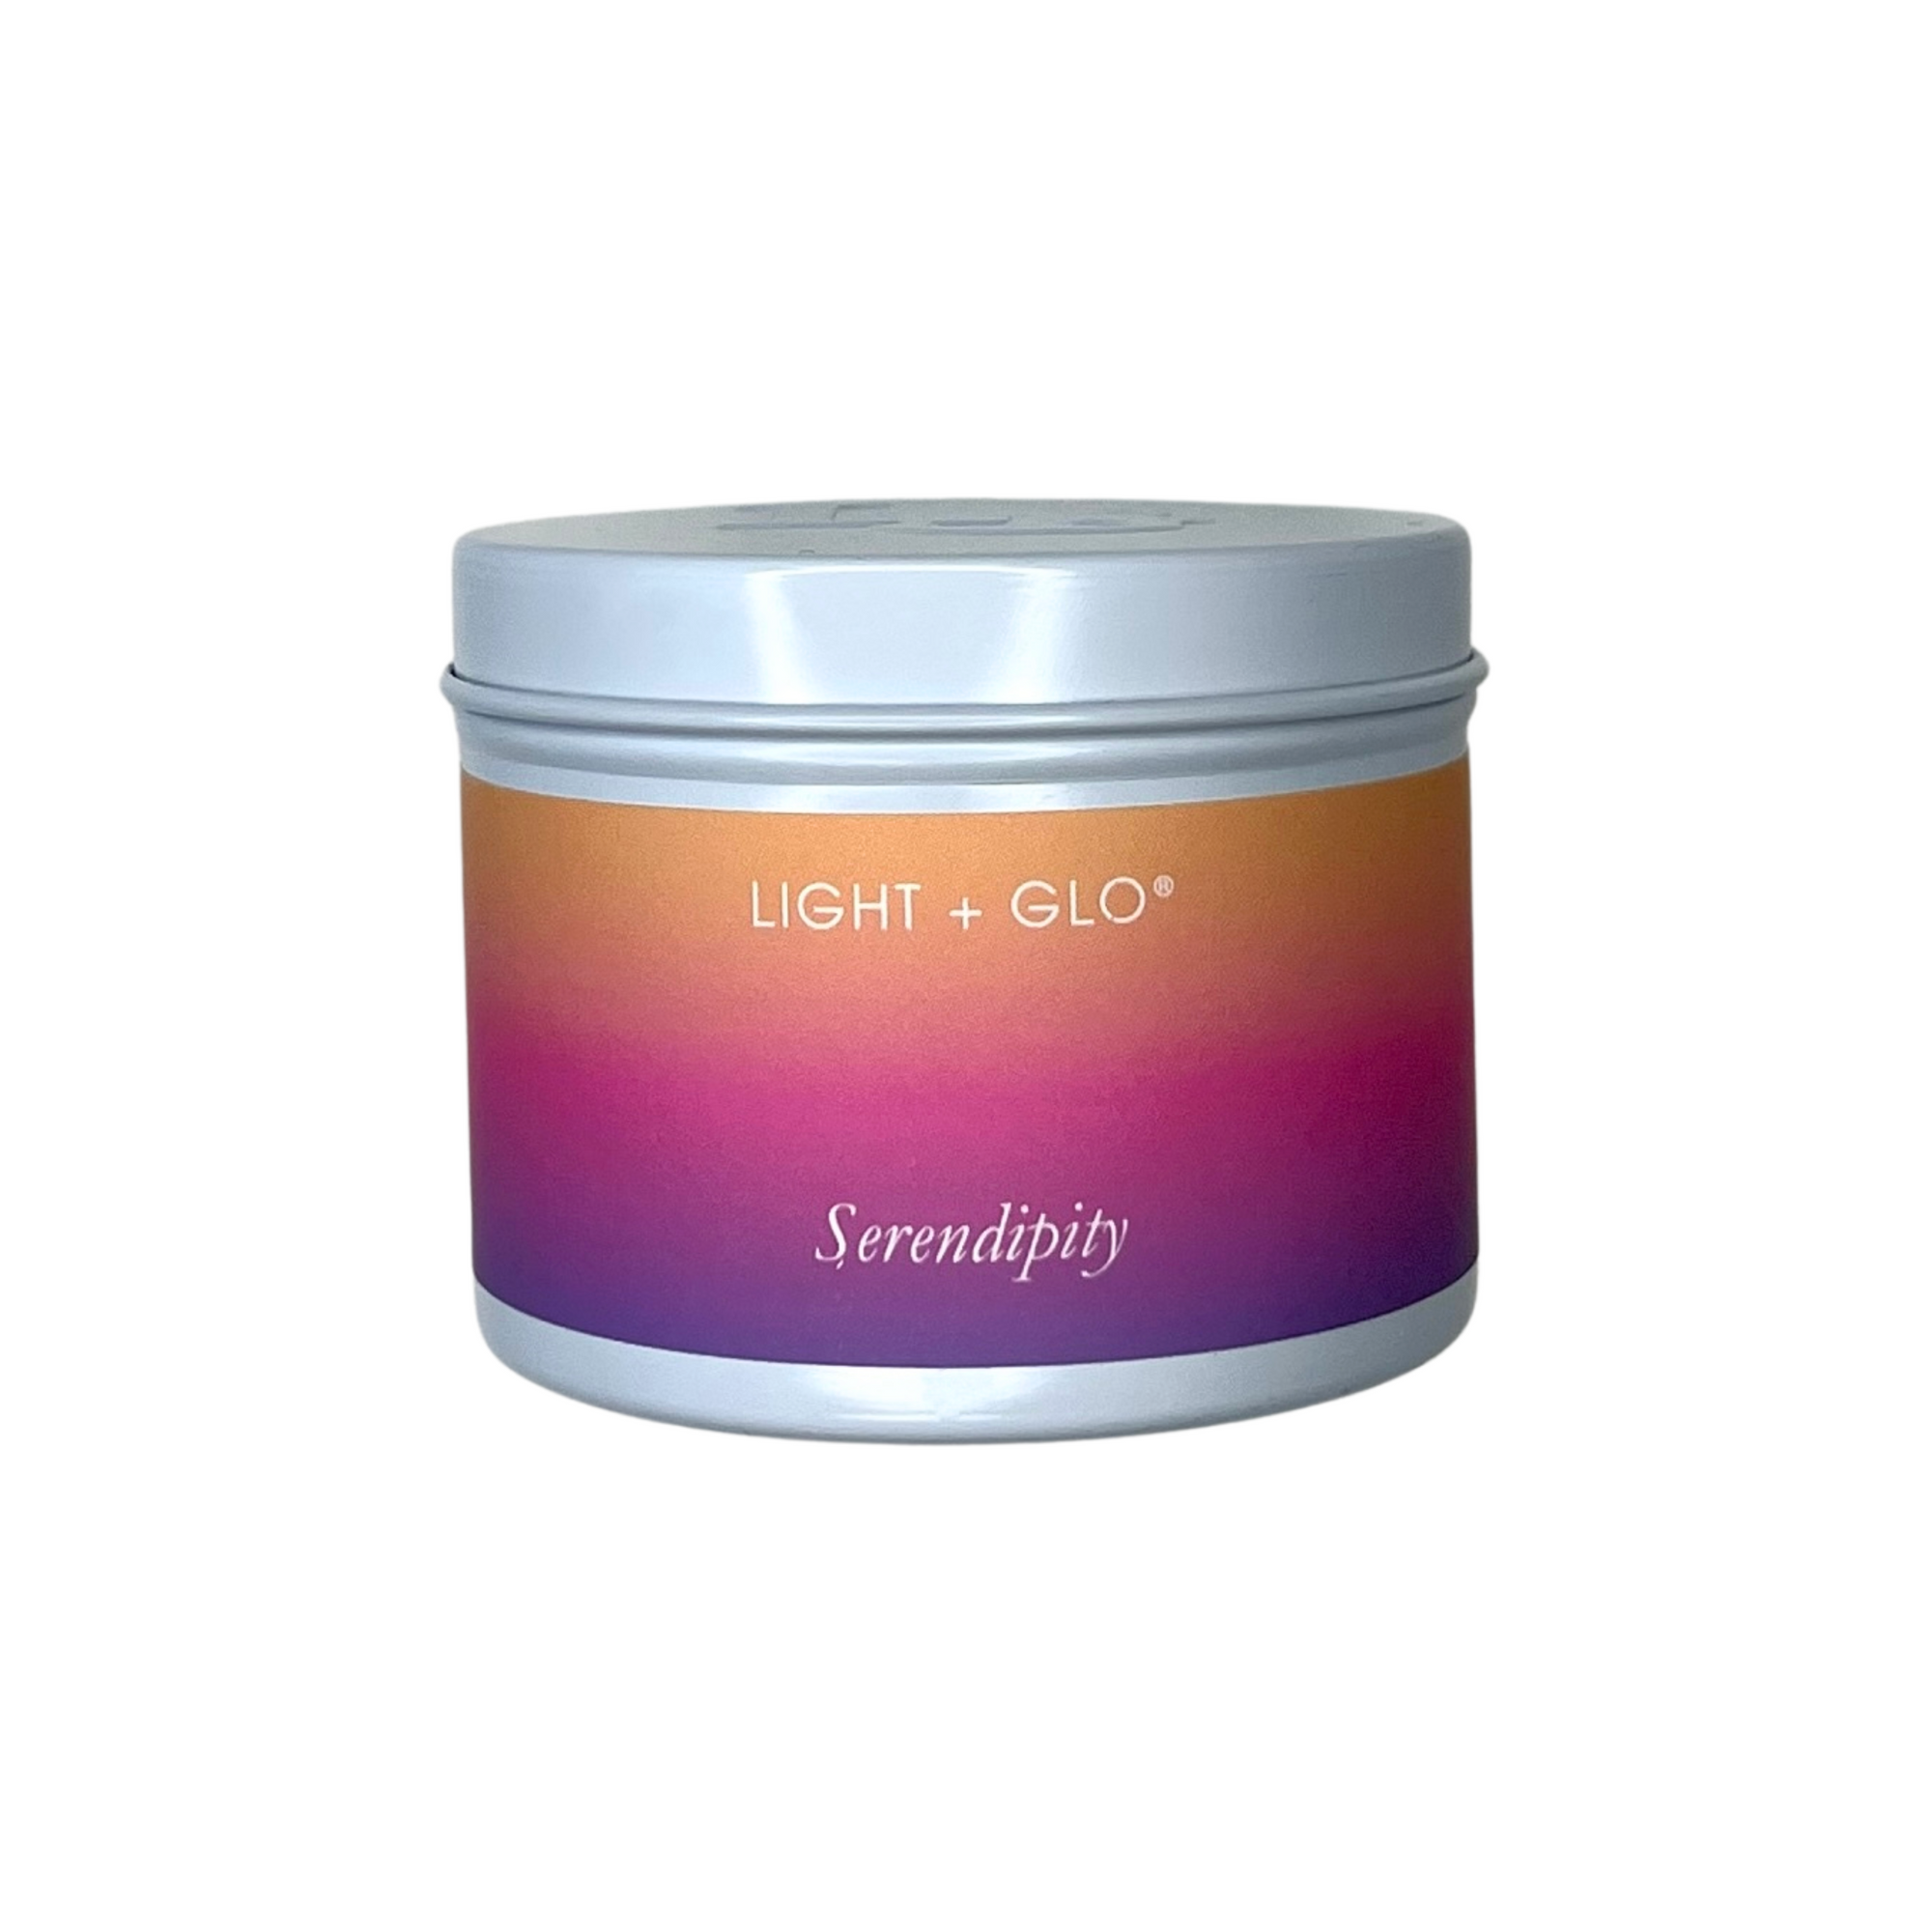 Santorini Travel Candle - Serendipity | Luxury Candles & Home Fragrances by Light + Glo